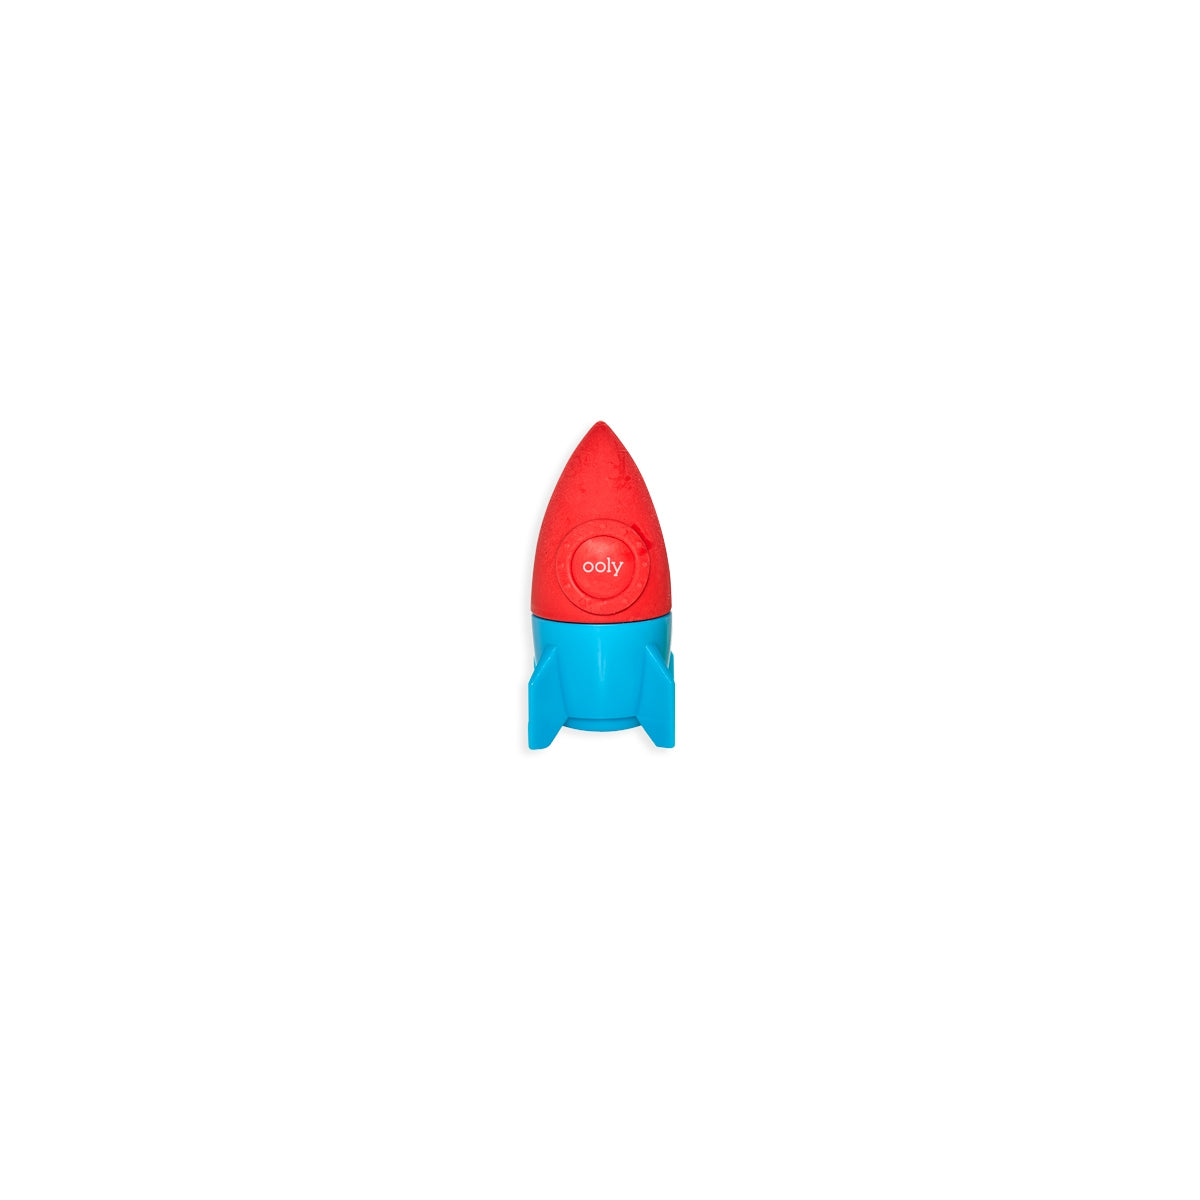 Red rocket with turquoise base. 